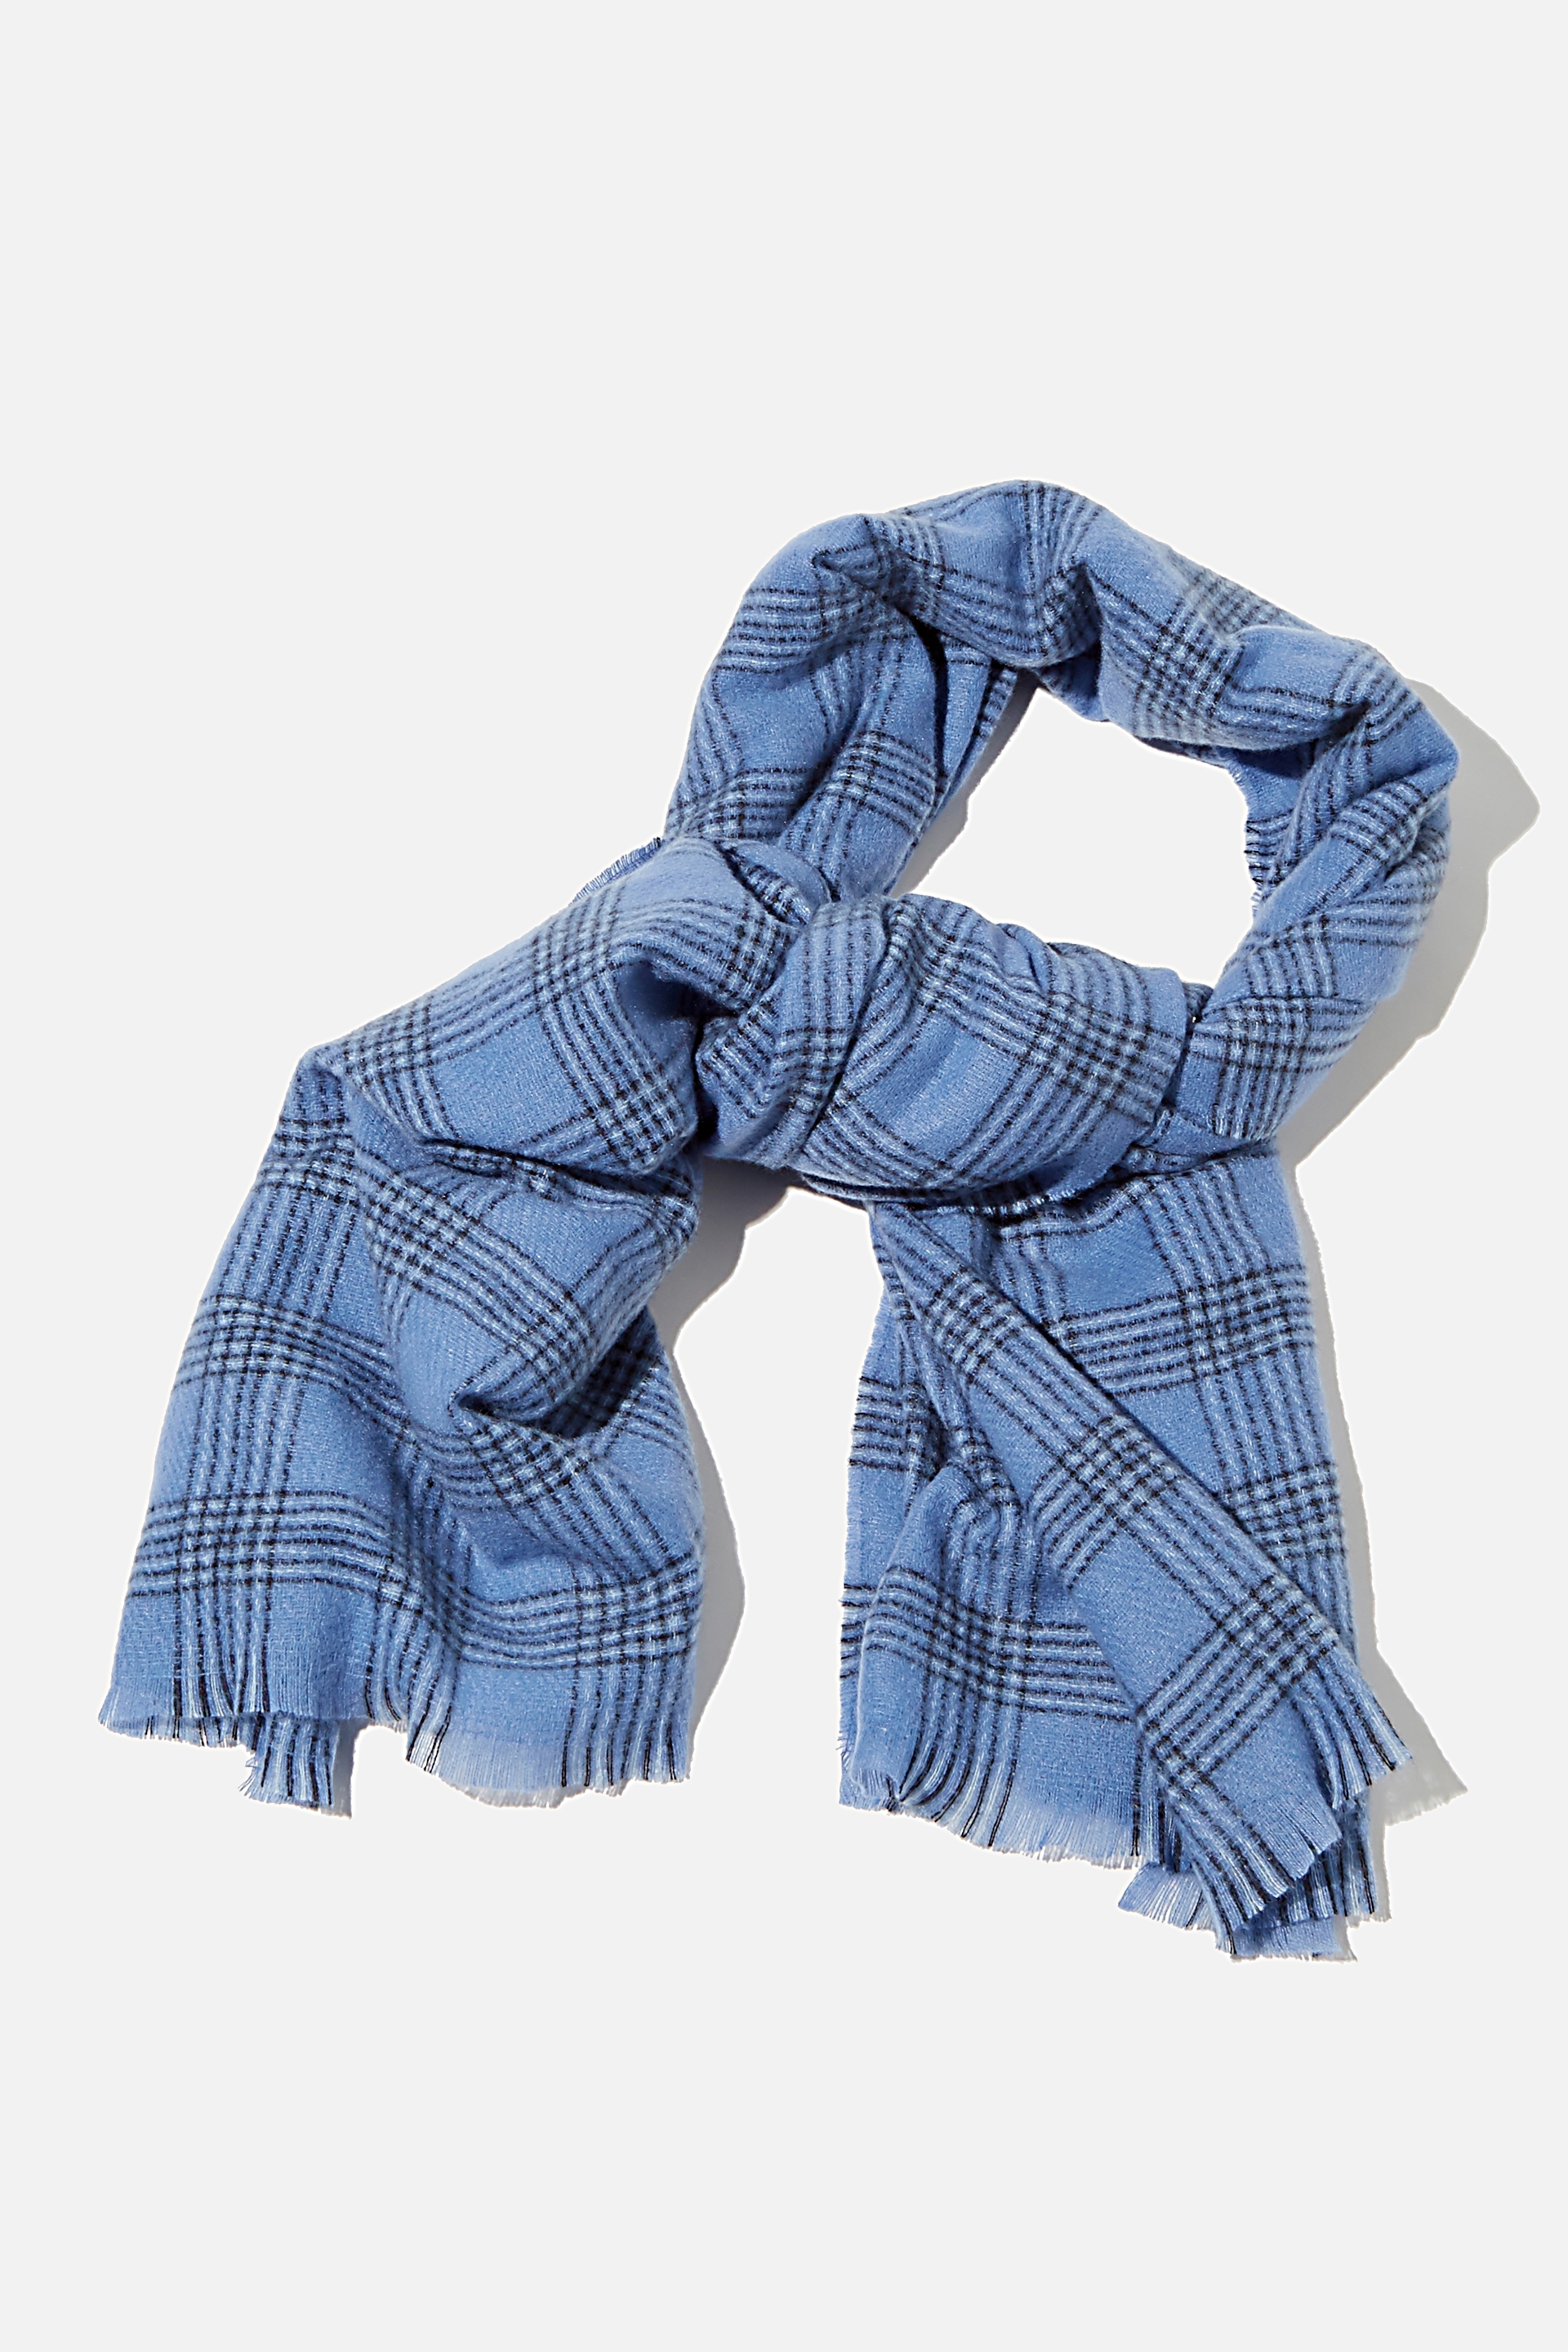 Rubi - Millie Mid Weight Scarf - Air blue charlotte check